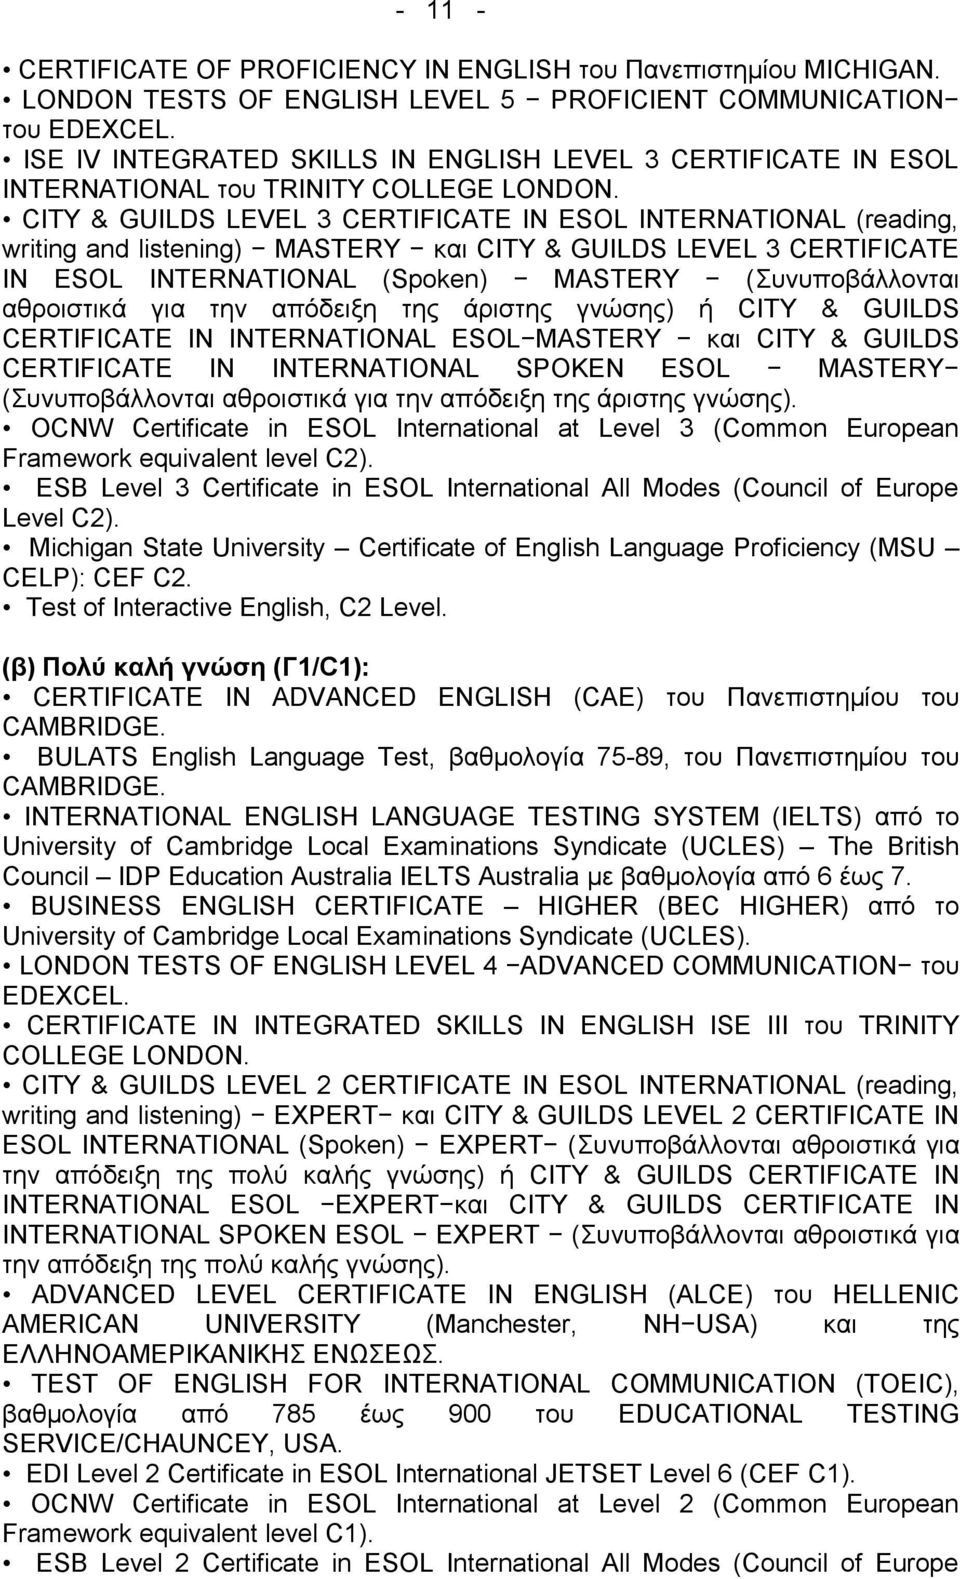 CITY & GUILDS LEVEL 3 CERTIFICATE IN ESOL INTERNATIONAL (reading, writing and listening) MASTERY θαη CITY & GUILDS LEVEL 3 CERTIFICATE IN ESOL INTERNATIONAL (Spoken) MASTERY (πλππνβάιινληαη